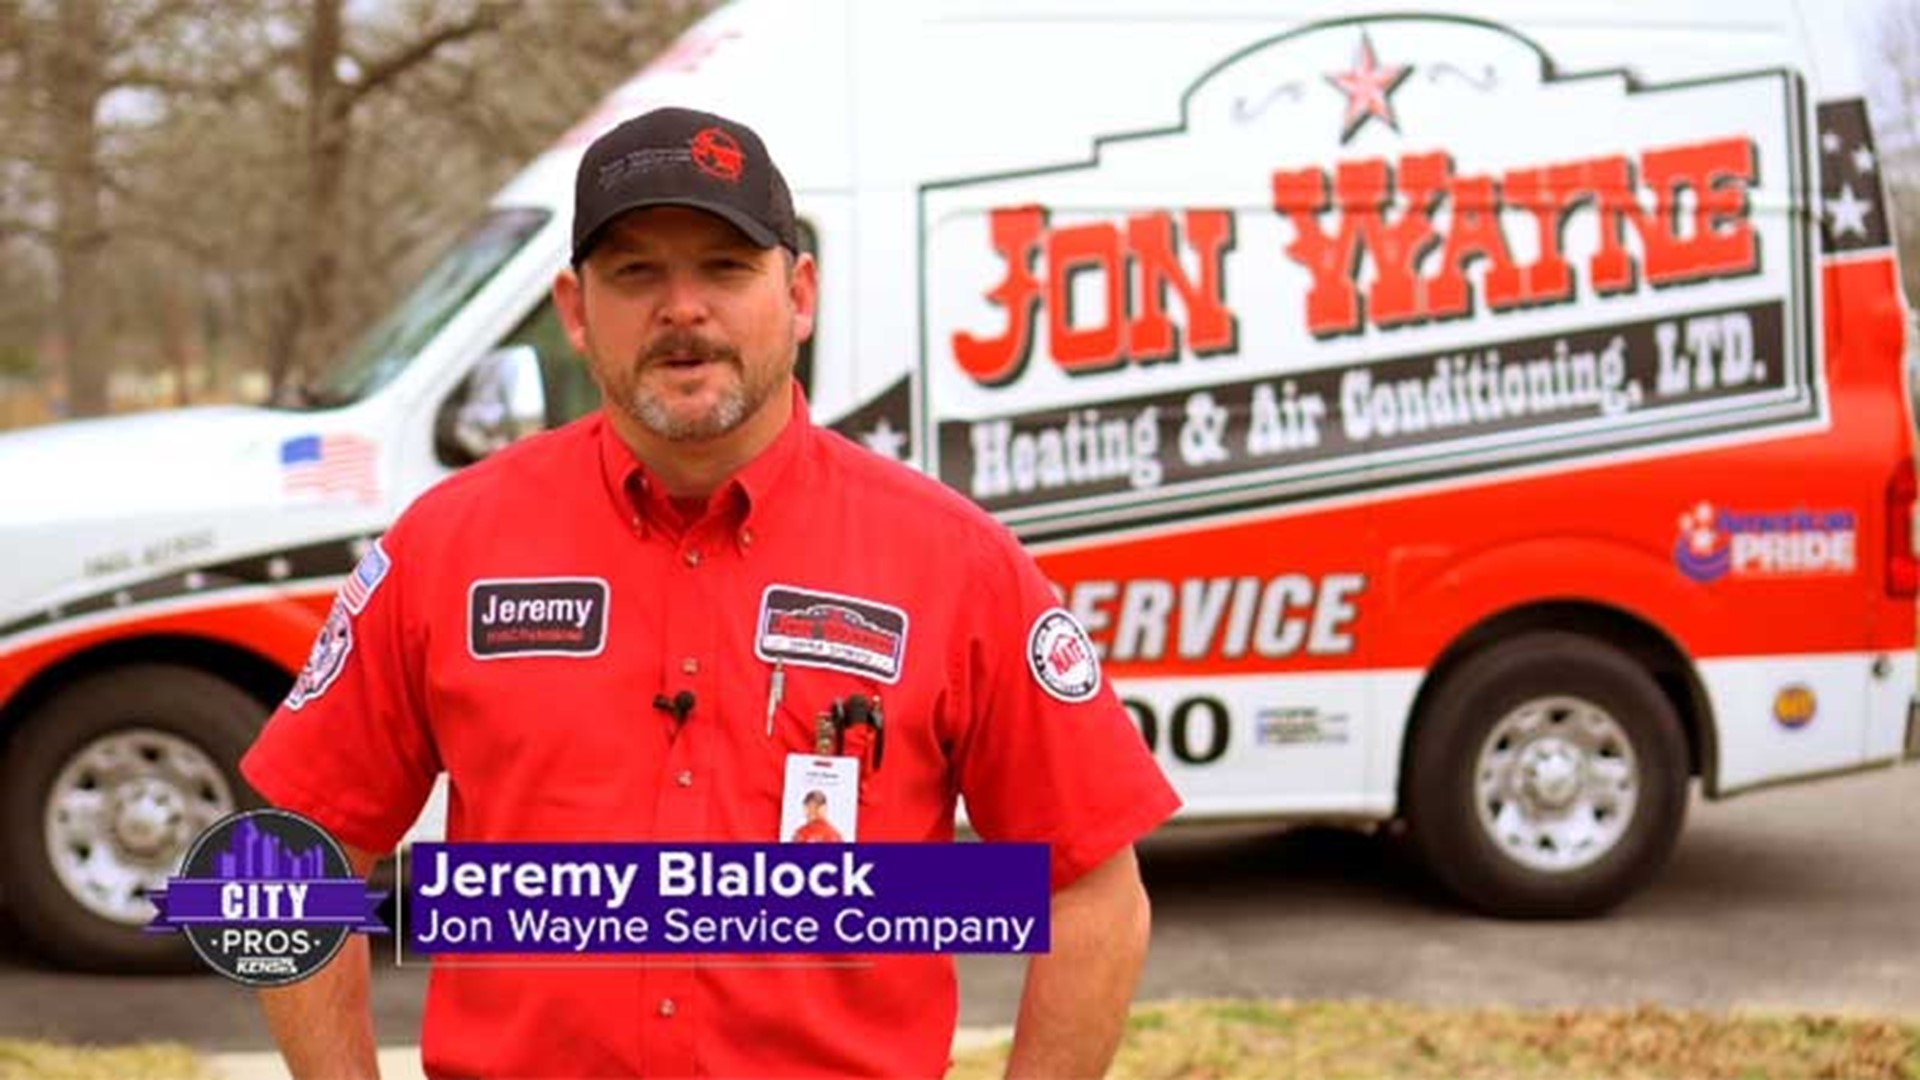 A Jon Wayne service technician can change filters, flush the drain and more to keep your home system operating correctly.